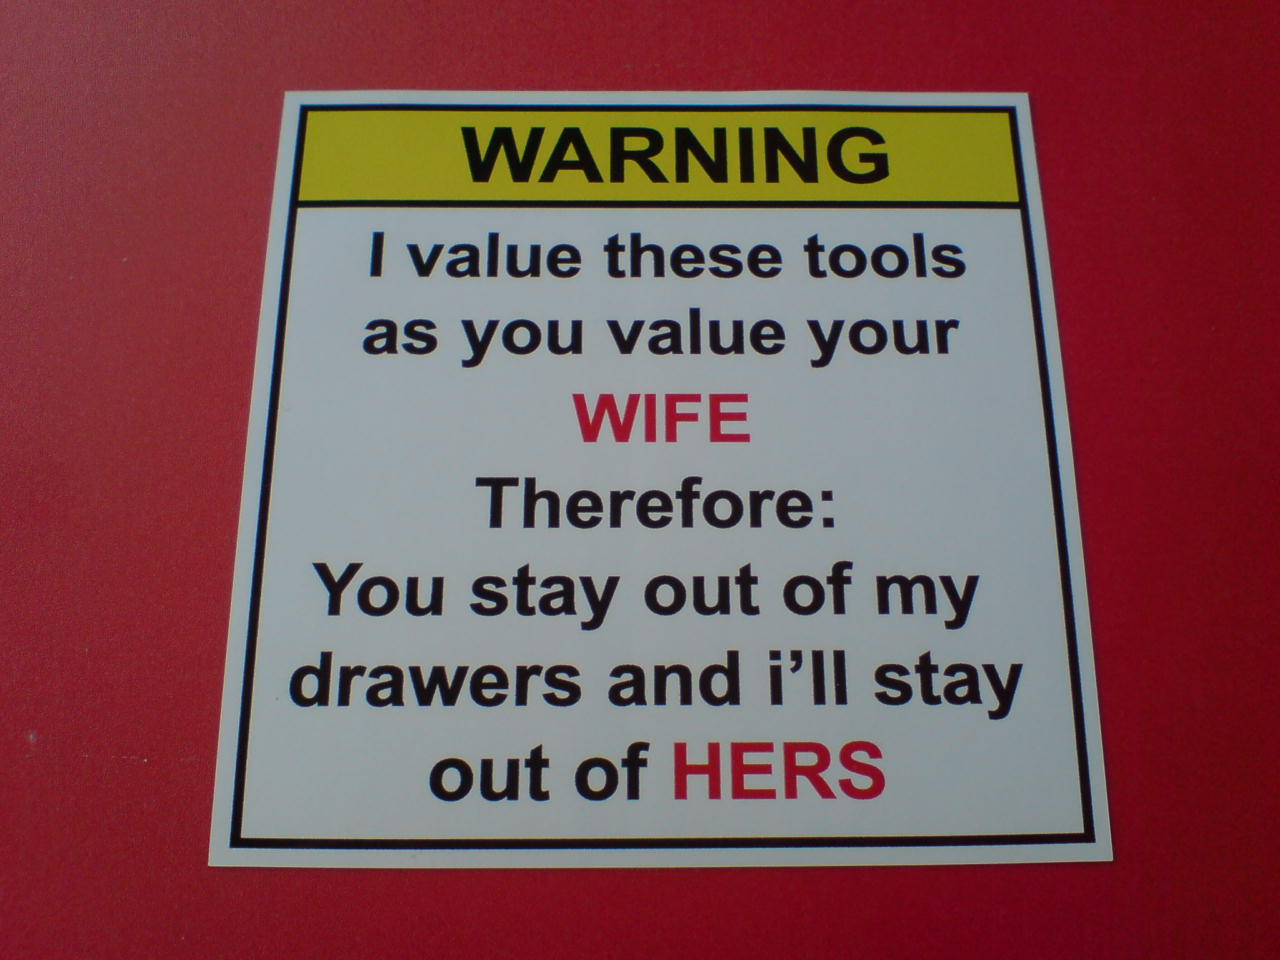 Warning in black lettering on a yellow banner. I value these tools as you value your wife. Therefore: You stay out of my drawers and I'll stay out of hers. Text is black. Wife and Hers is highlighted in red.